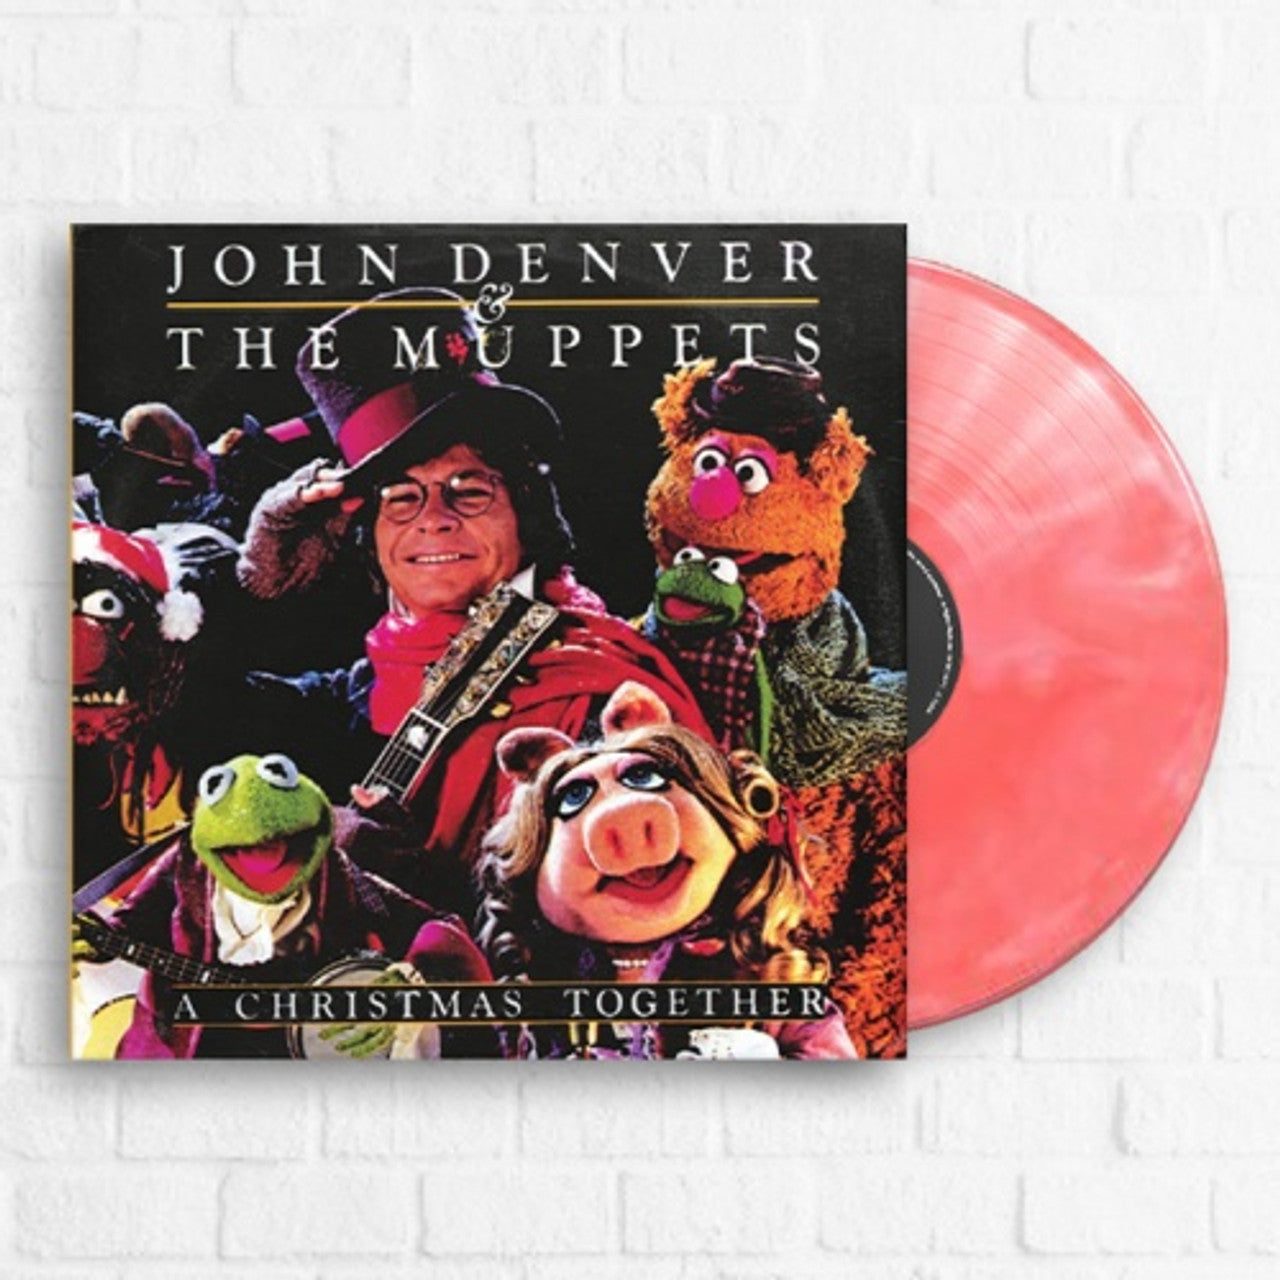 John Denver & The Muppets: A Christmas Together: Candy Cane Swirl Vinyl